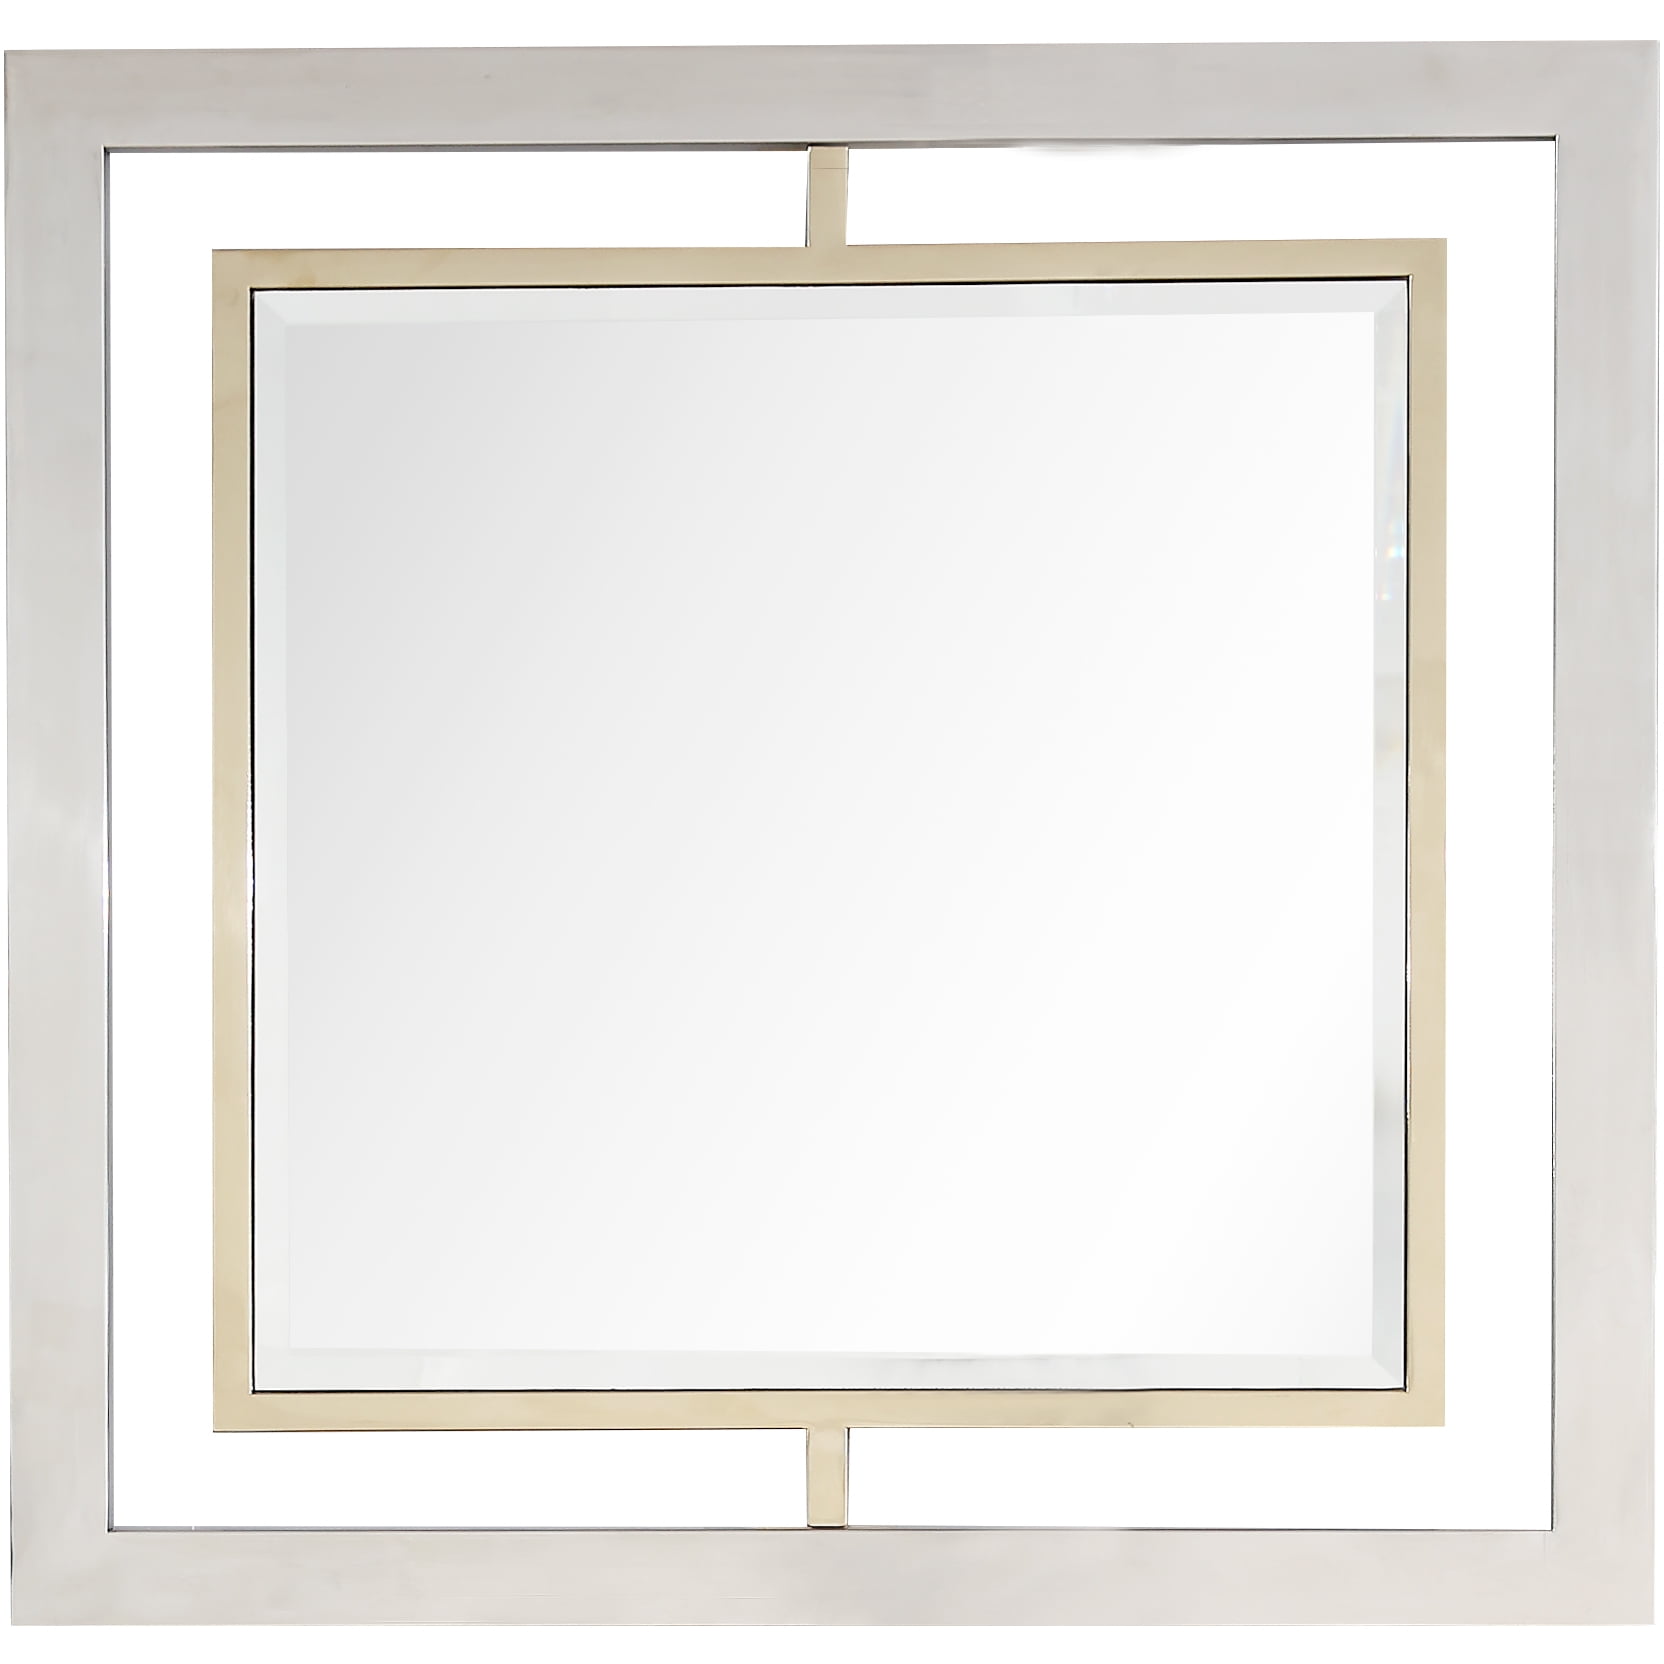 Picture of Camden Isle 86459 32 x 32 in. Virginia Wall Mirror